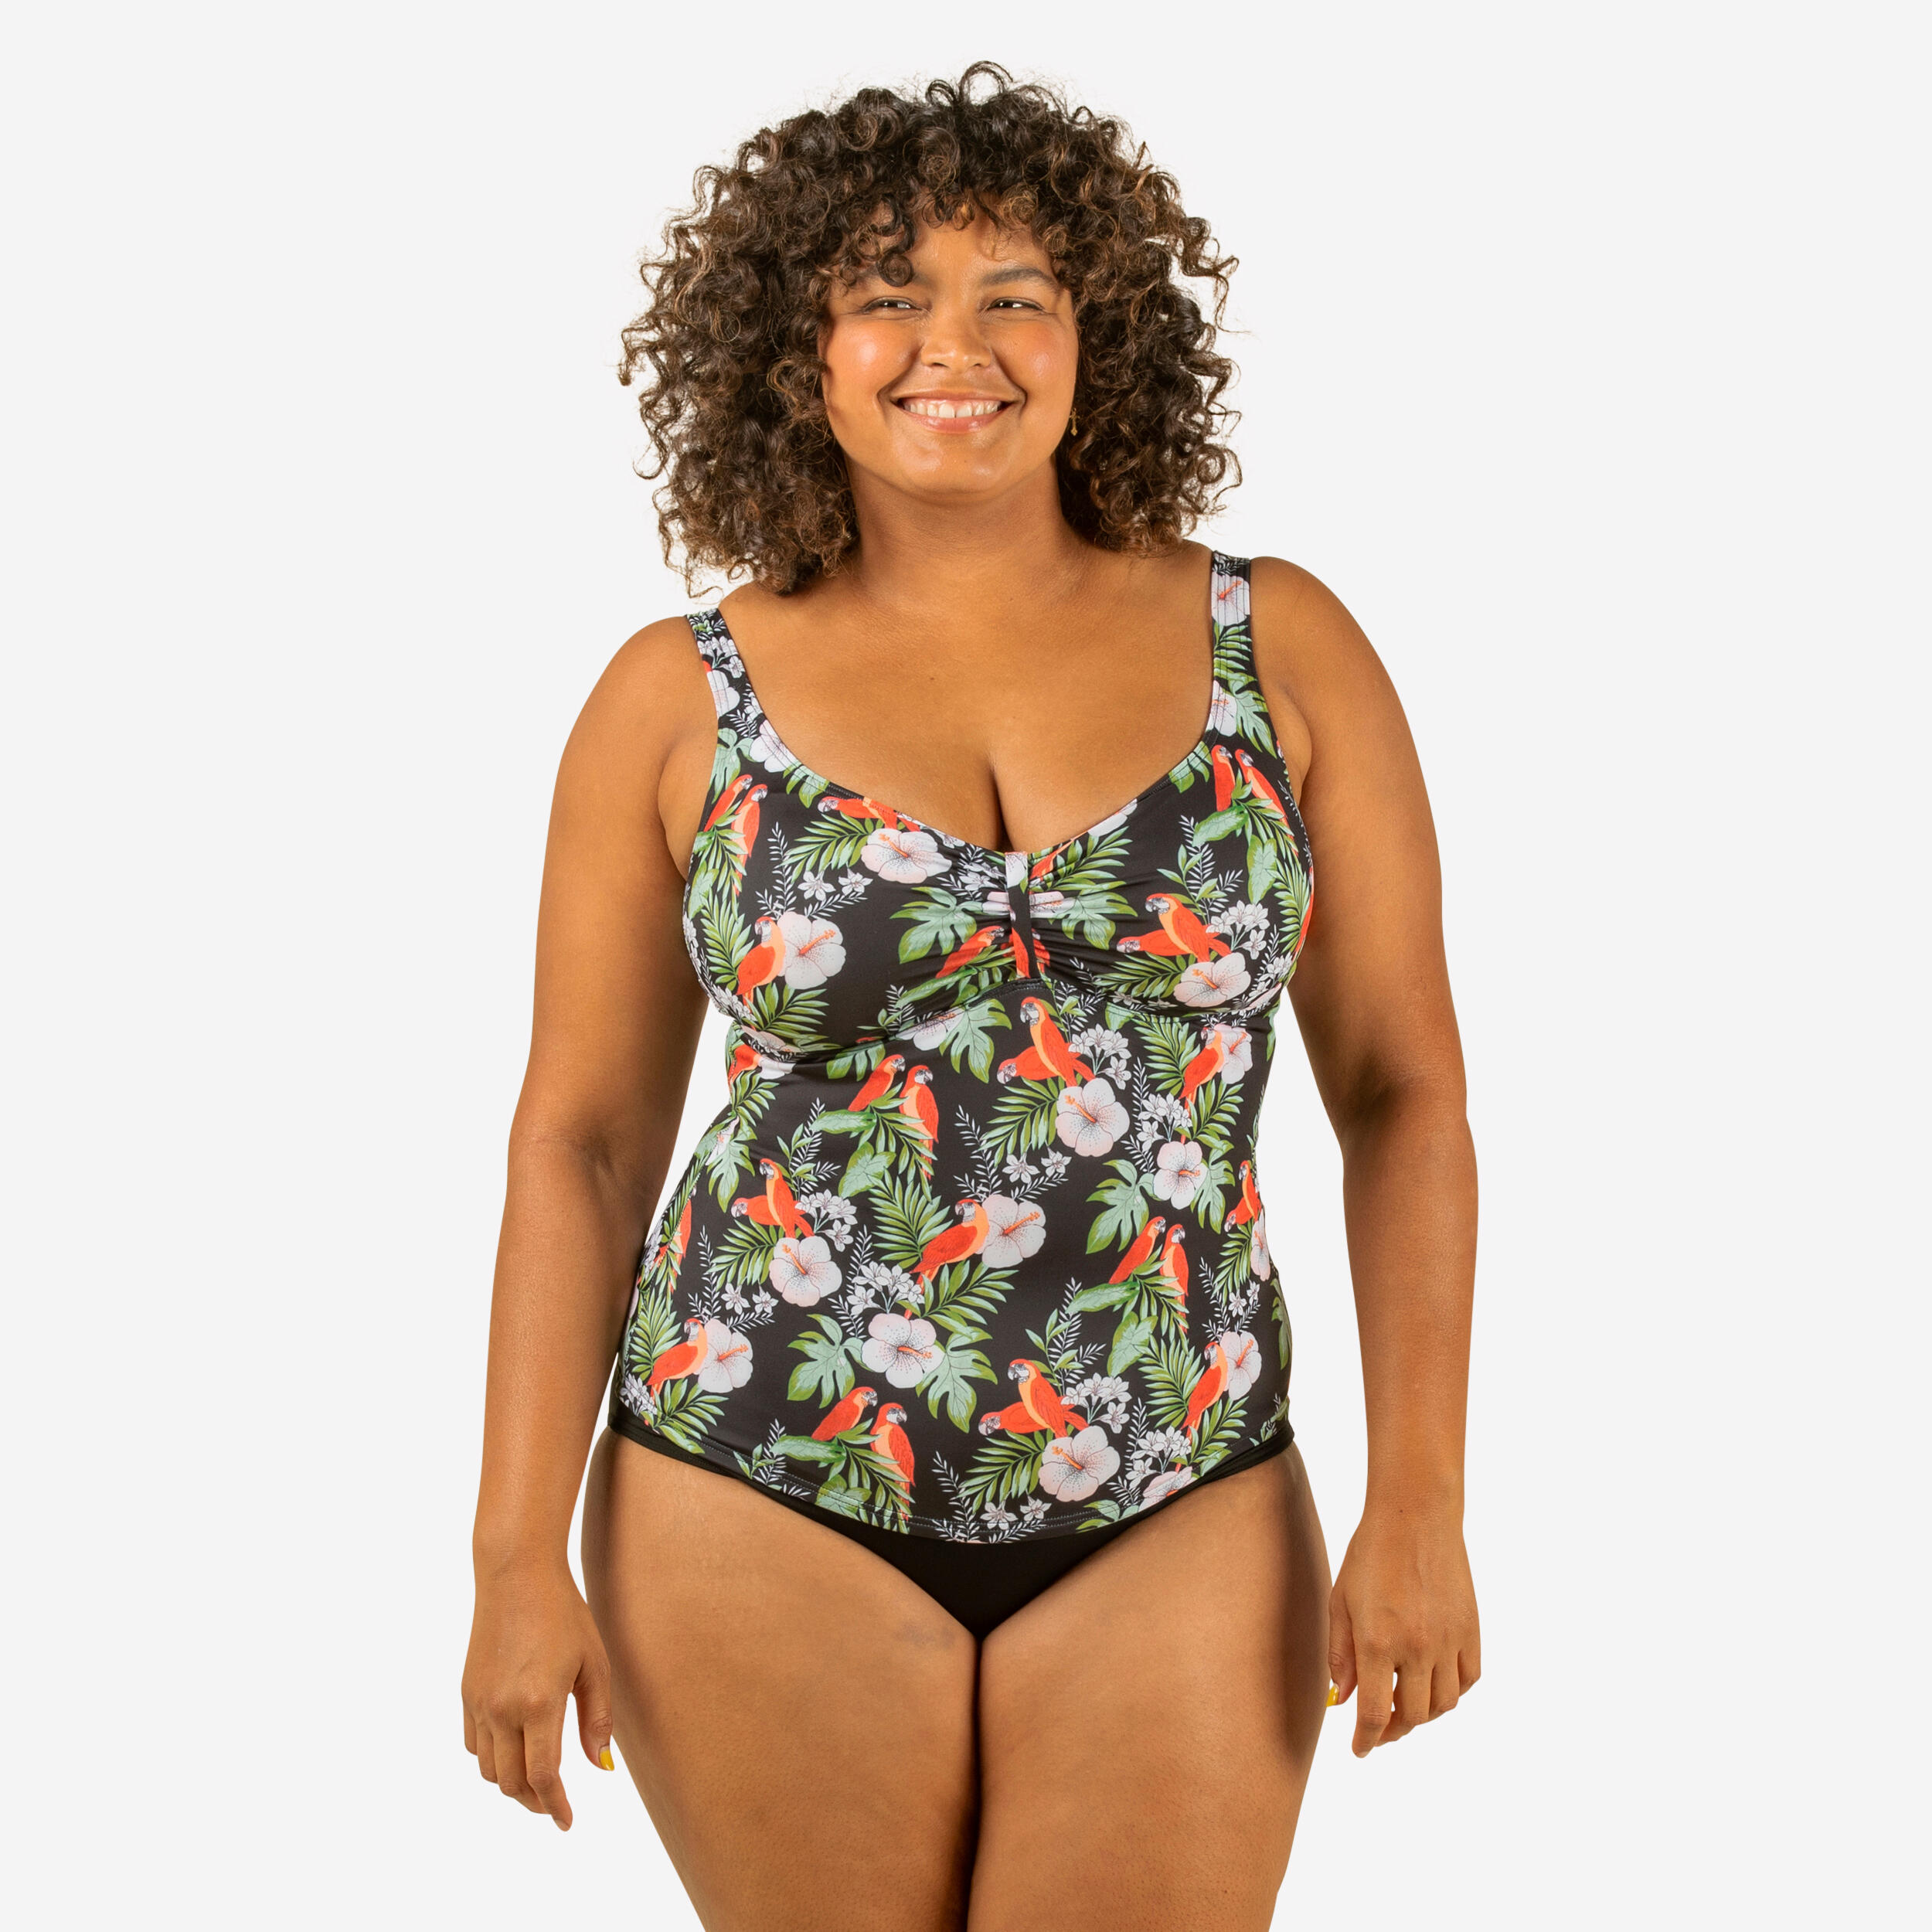 Adult Plus Size Camisole Leotard with Padded Cups